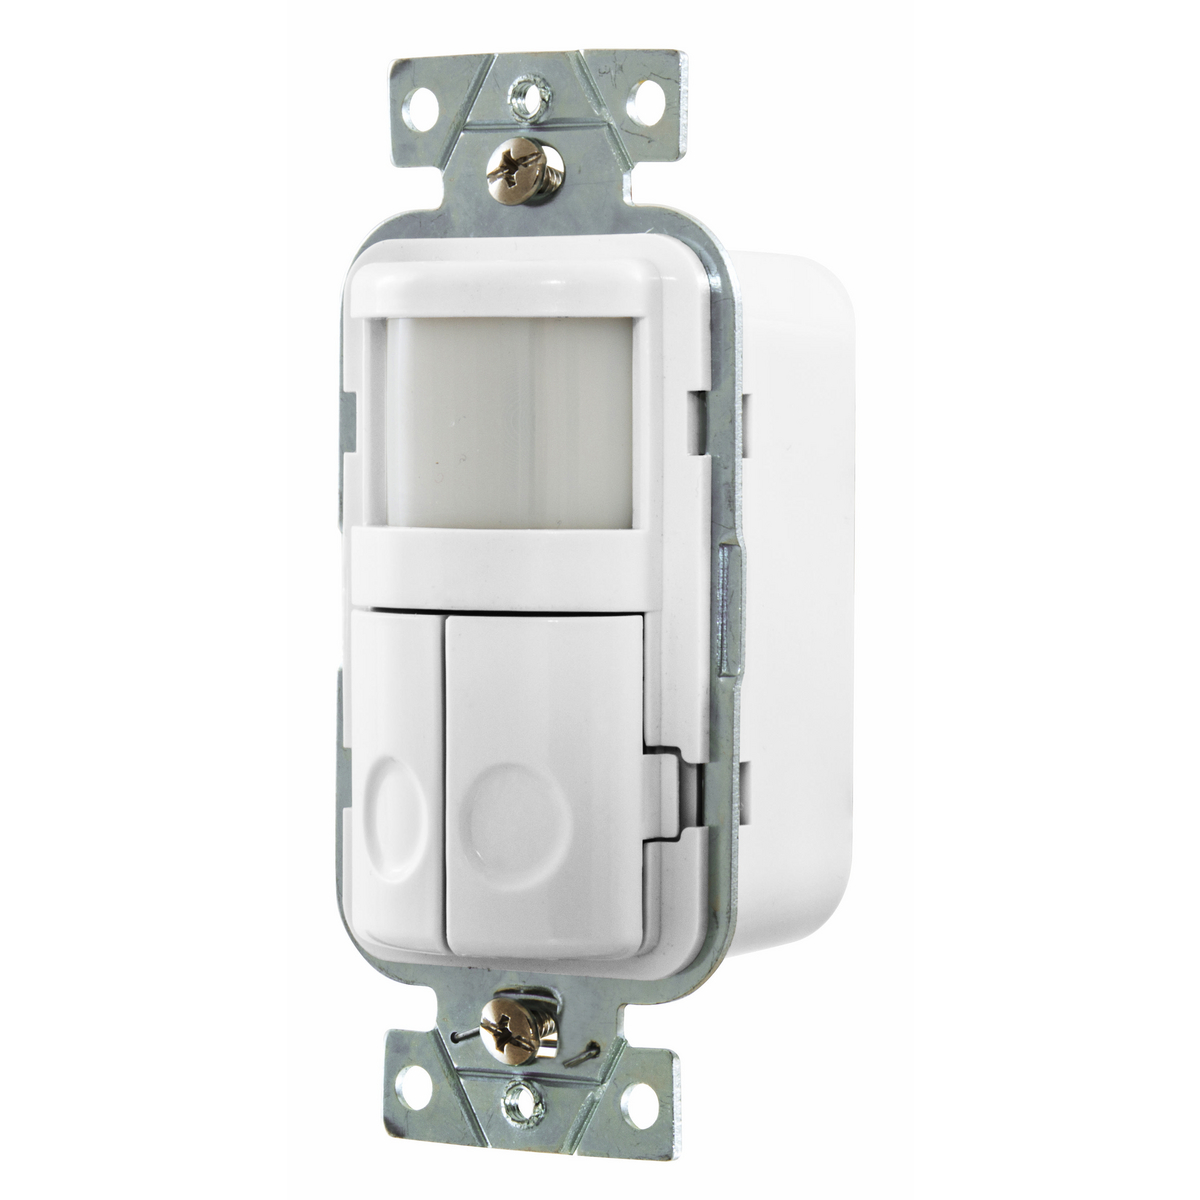 Occupancy Sensor Switch, Passive Infrared, 2-Circuit, With Night Light, White